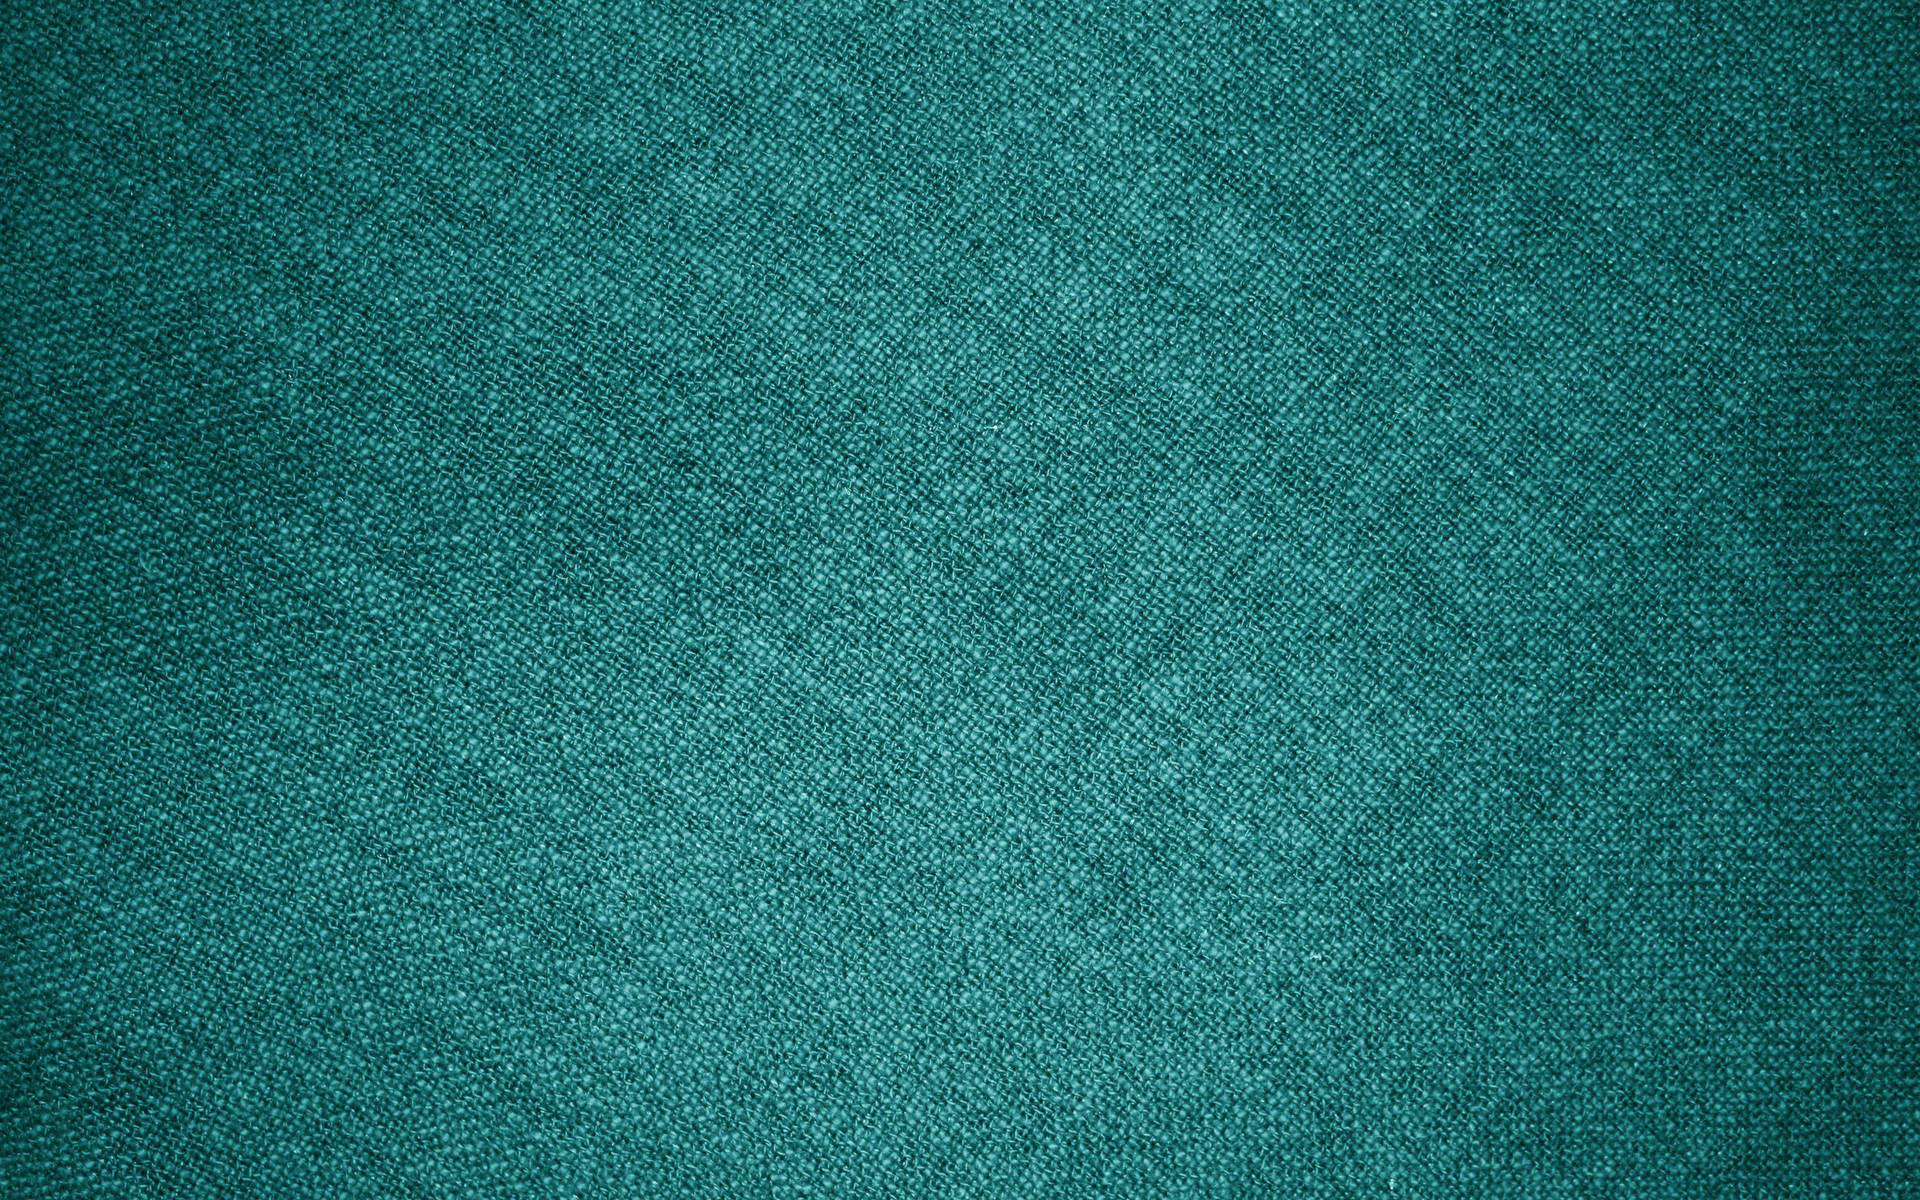 3840X2400 Textured Wallpaper and Background